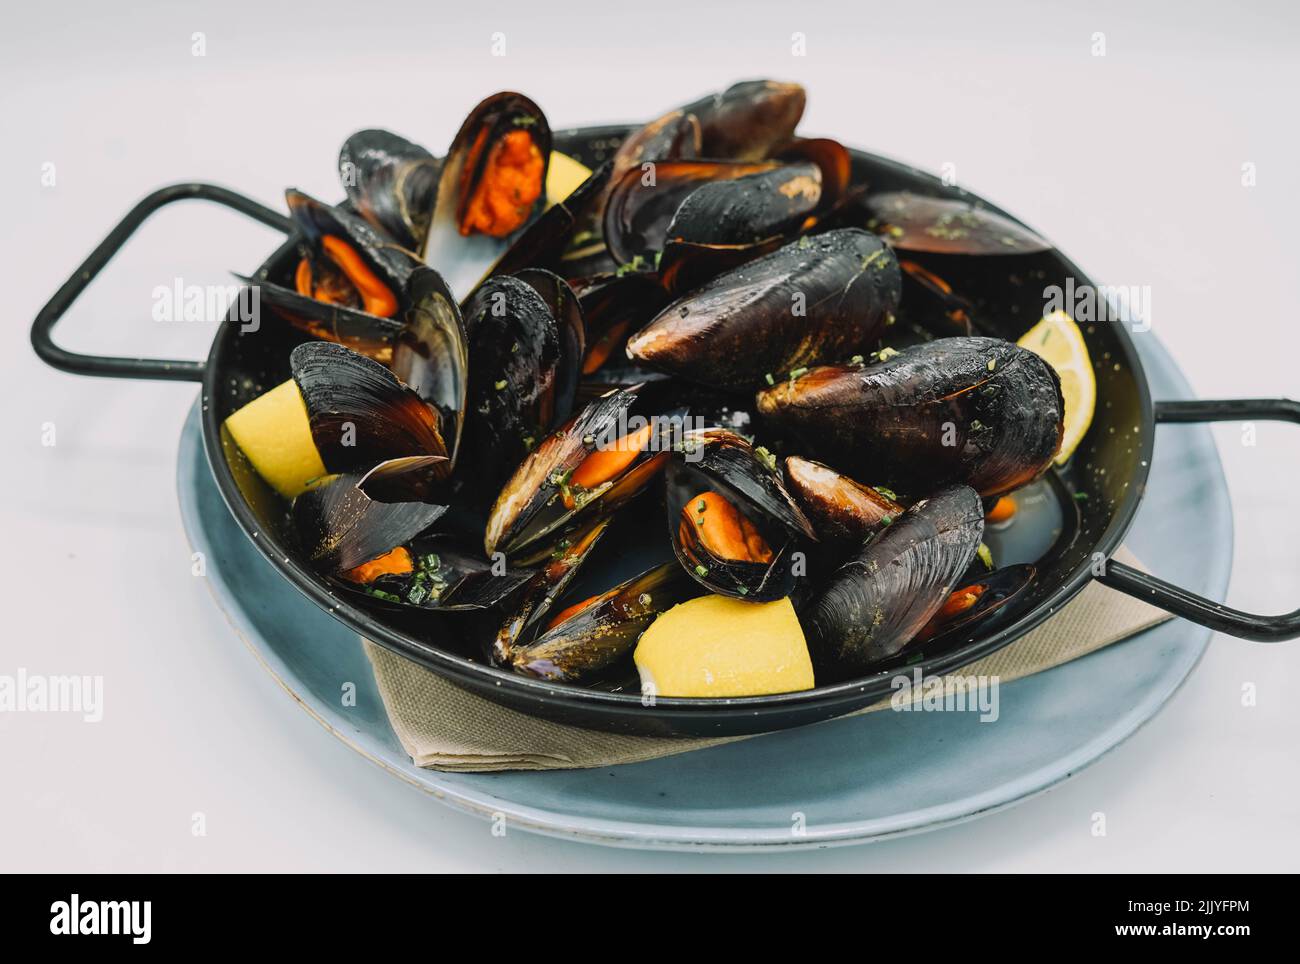 A portion of steamed mussels with garlic and parsley Stock Photo